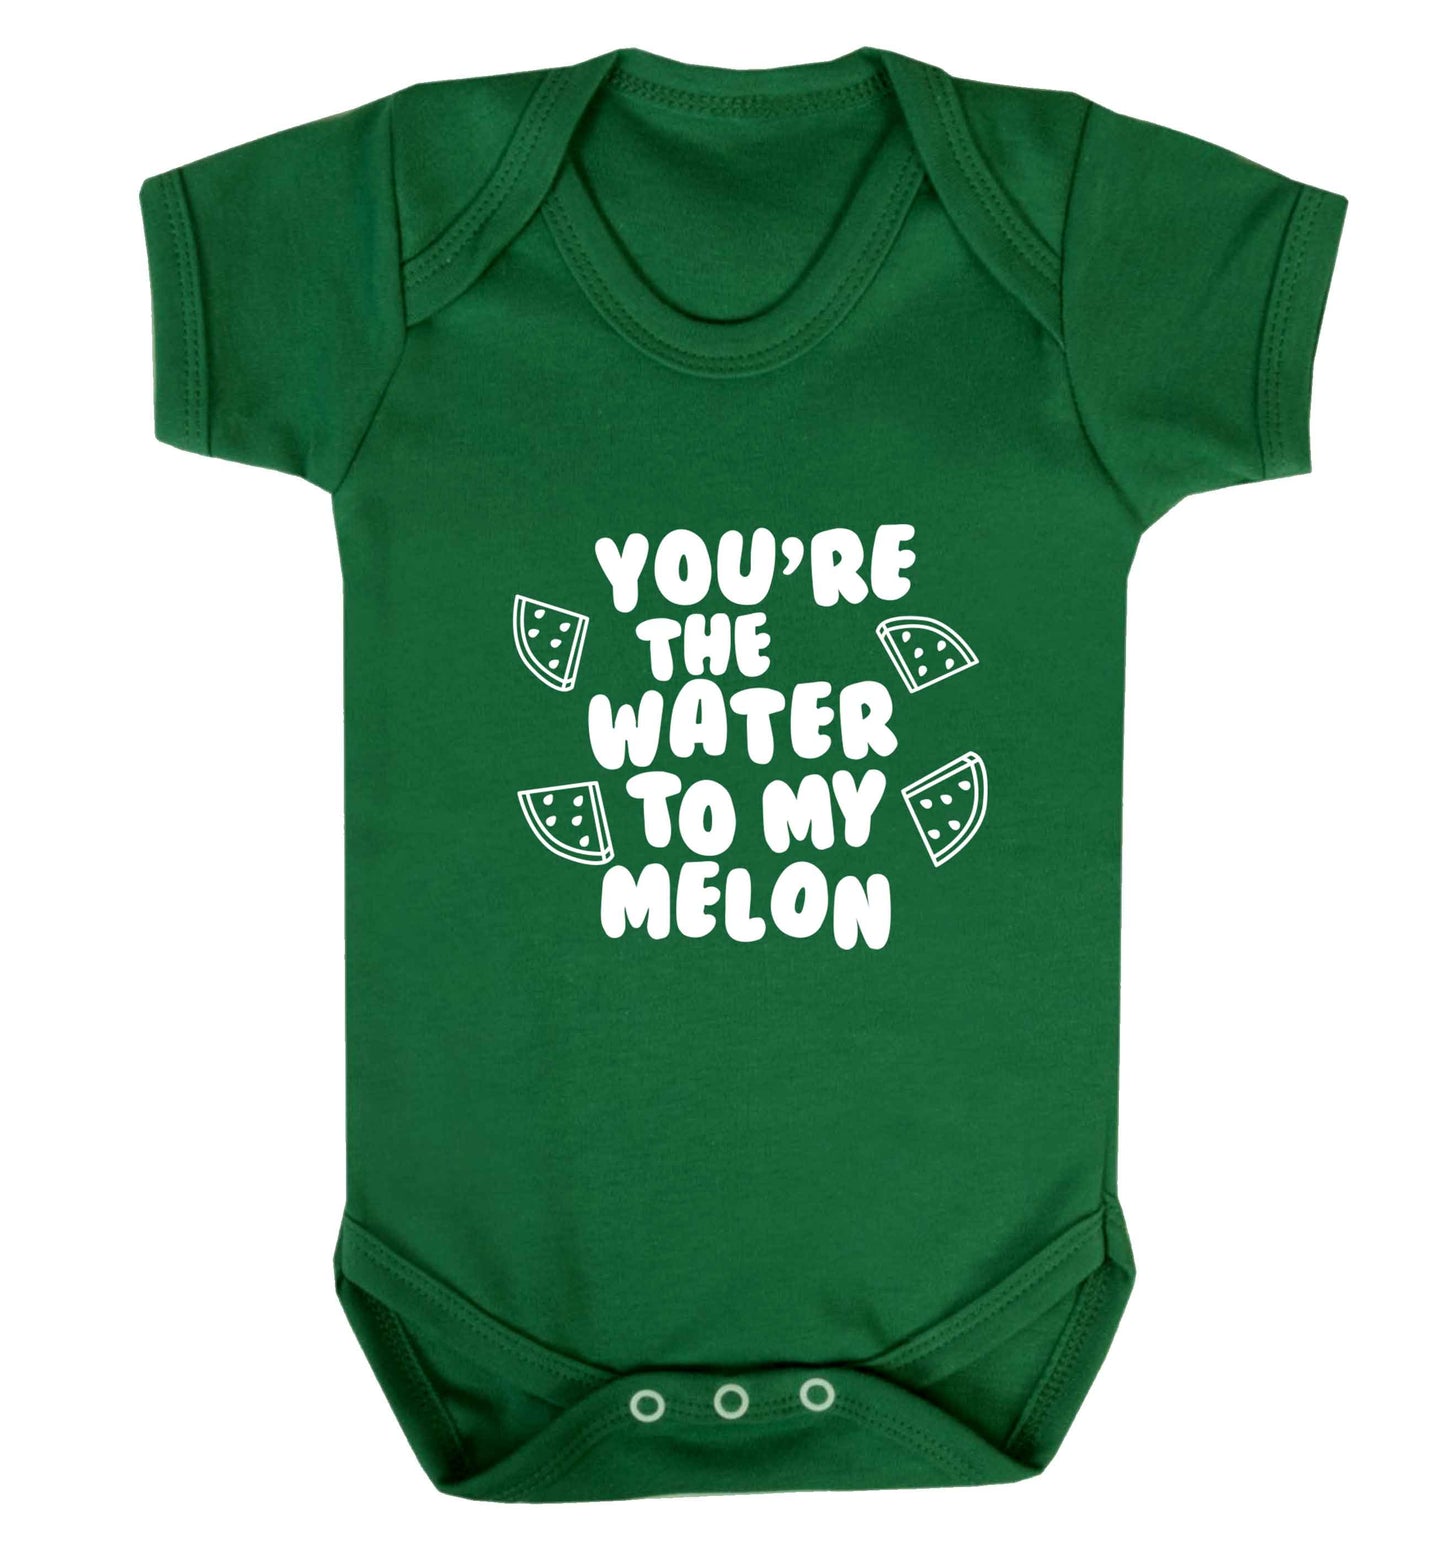 You're the water to my melon baby vest green 18-24 months